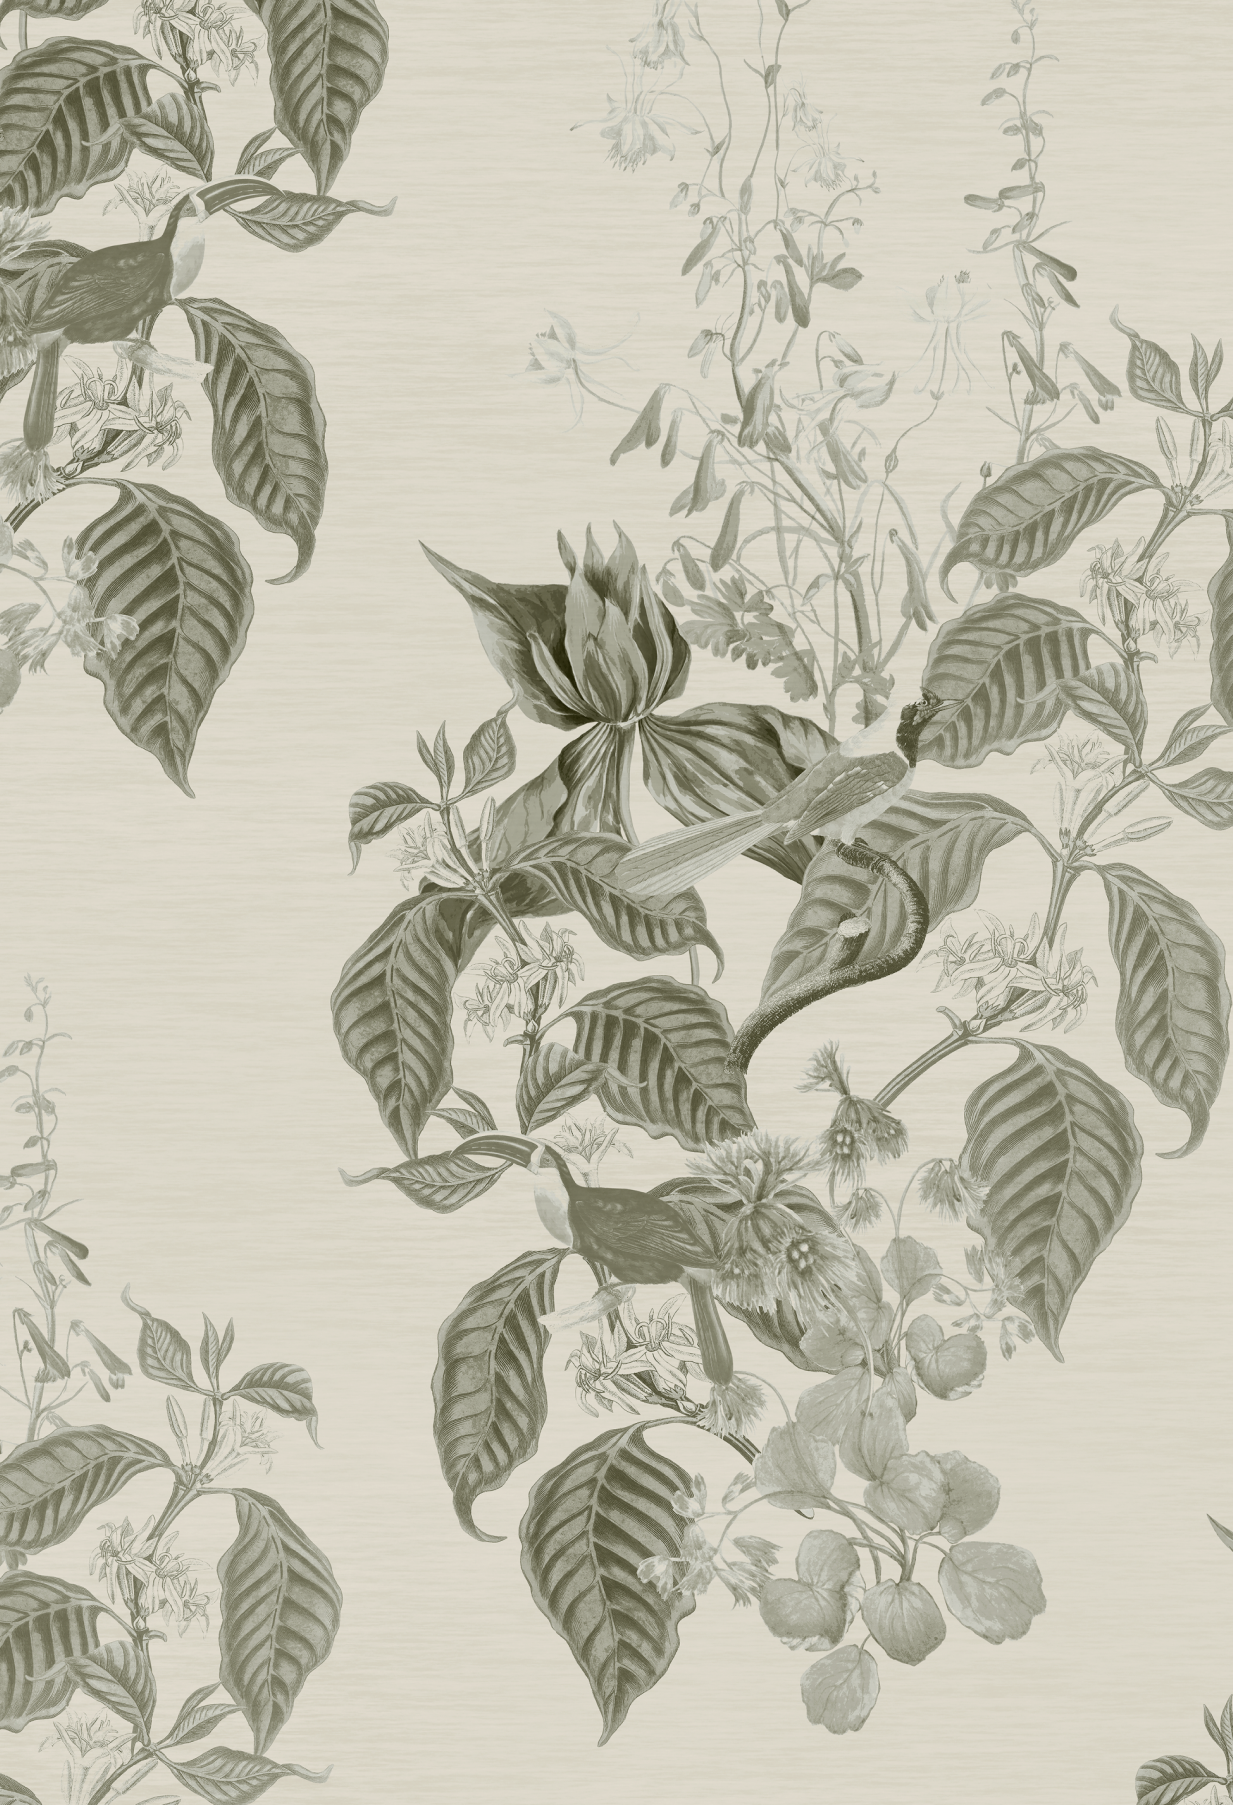 Grey birds with flowers and leaves featuring the Aviary Isle Walllpaper in French Gray by Deus ex Gardenia.